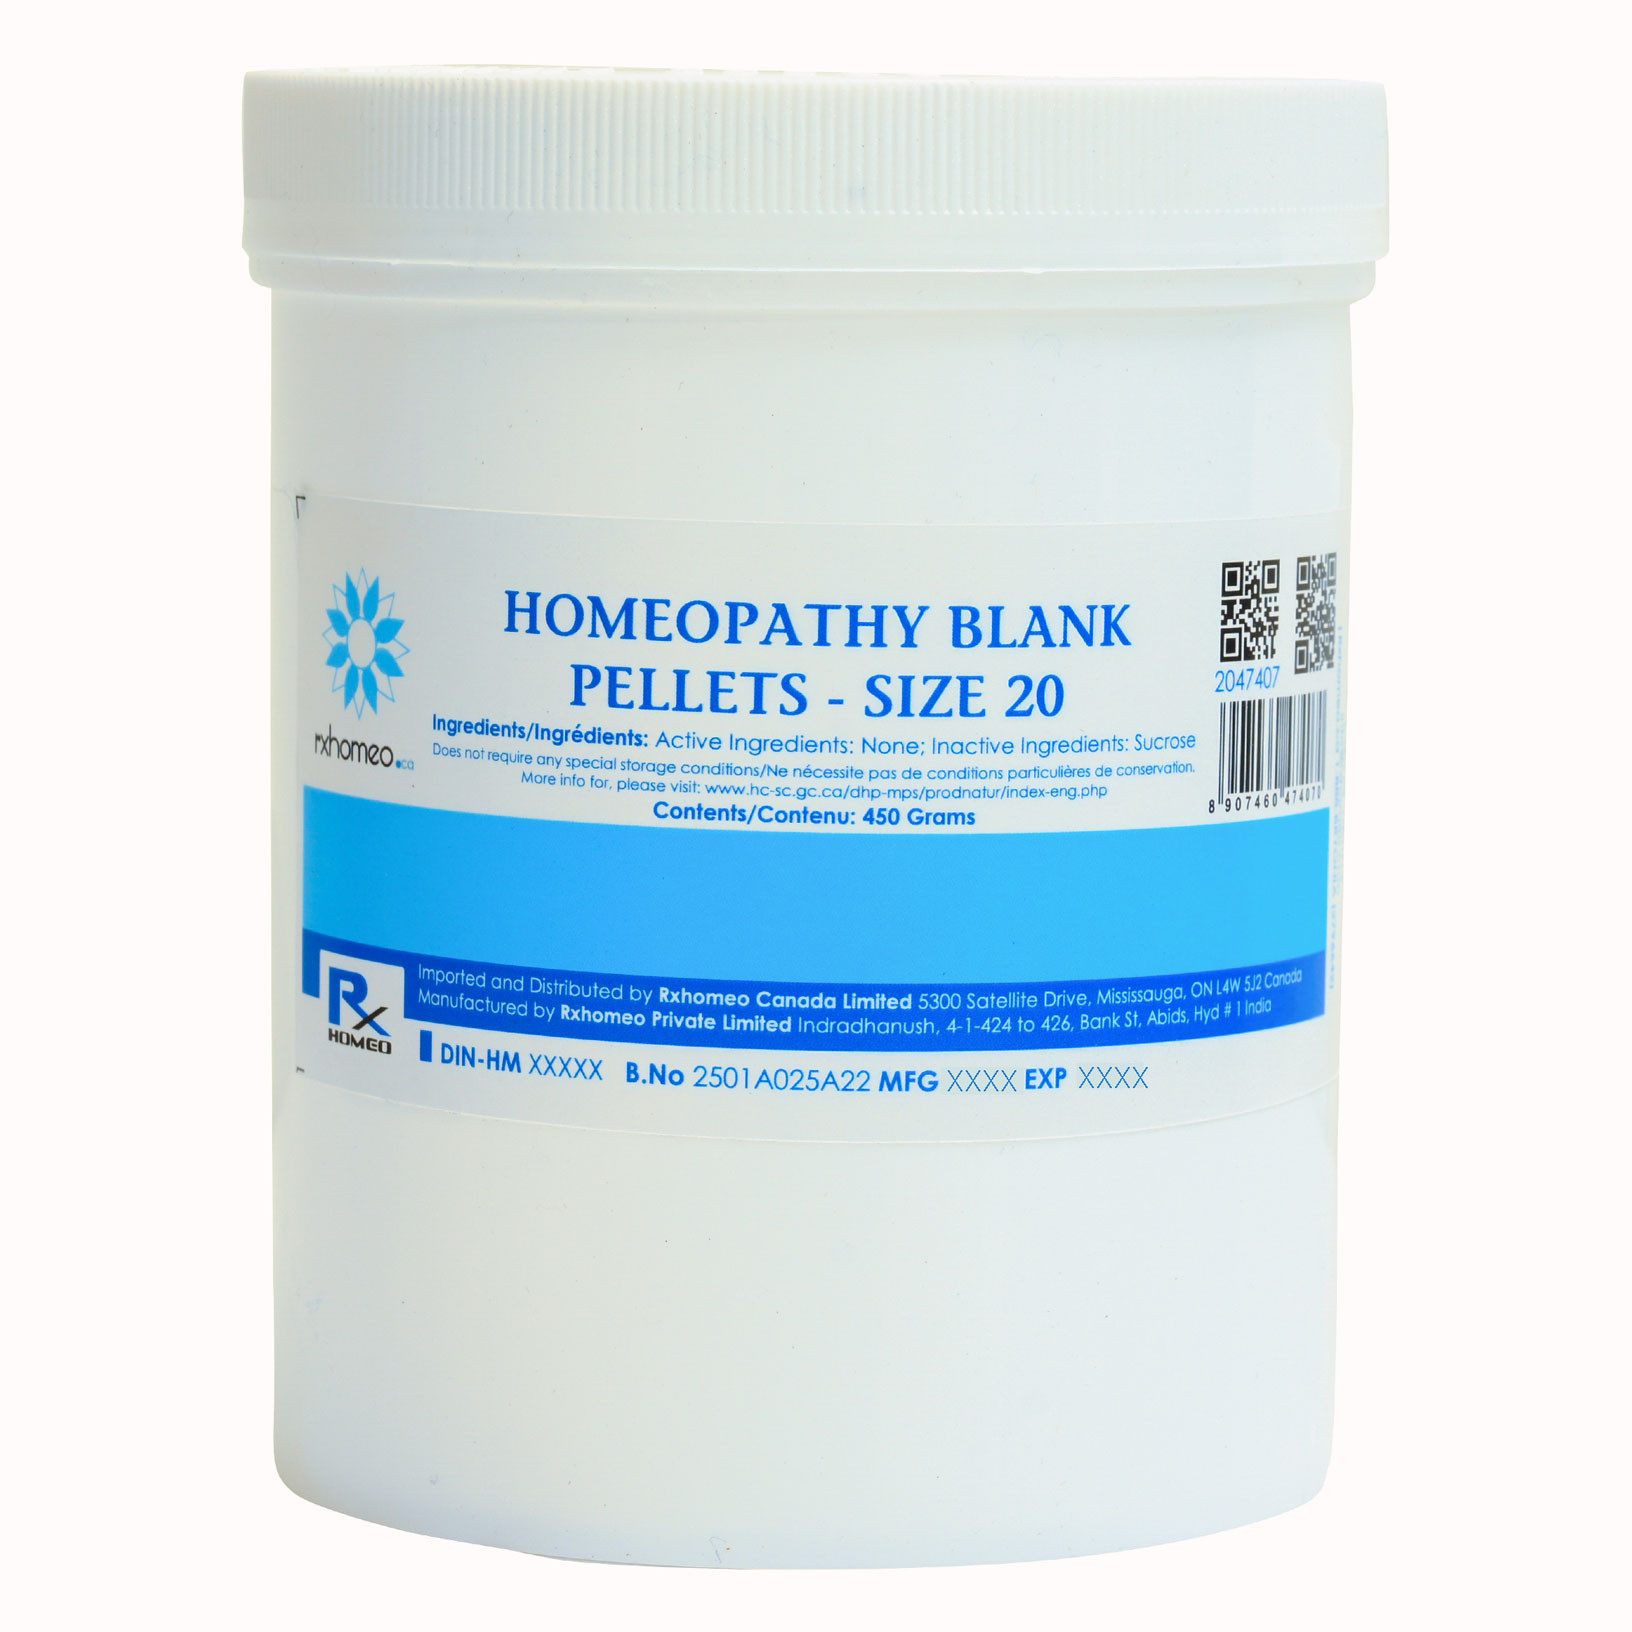 HOMEOPATHY BLANK PELLETS Size 20 - English and French Label for Canada